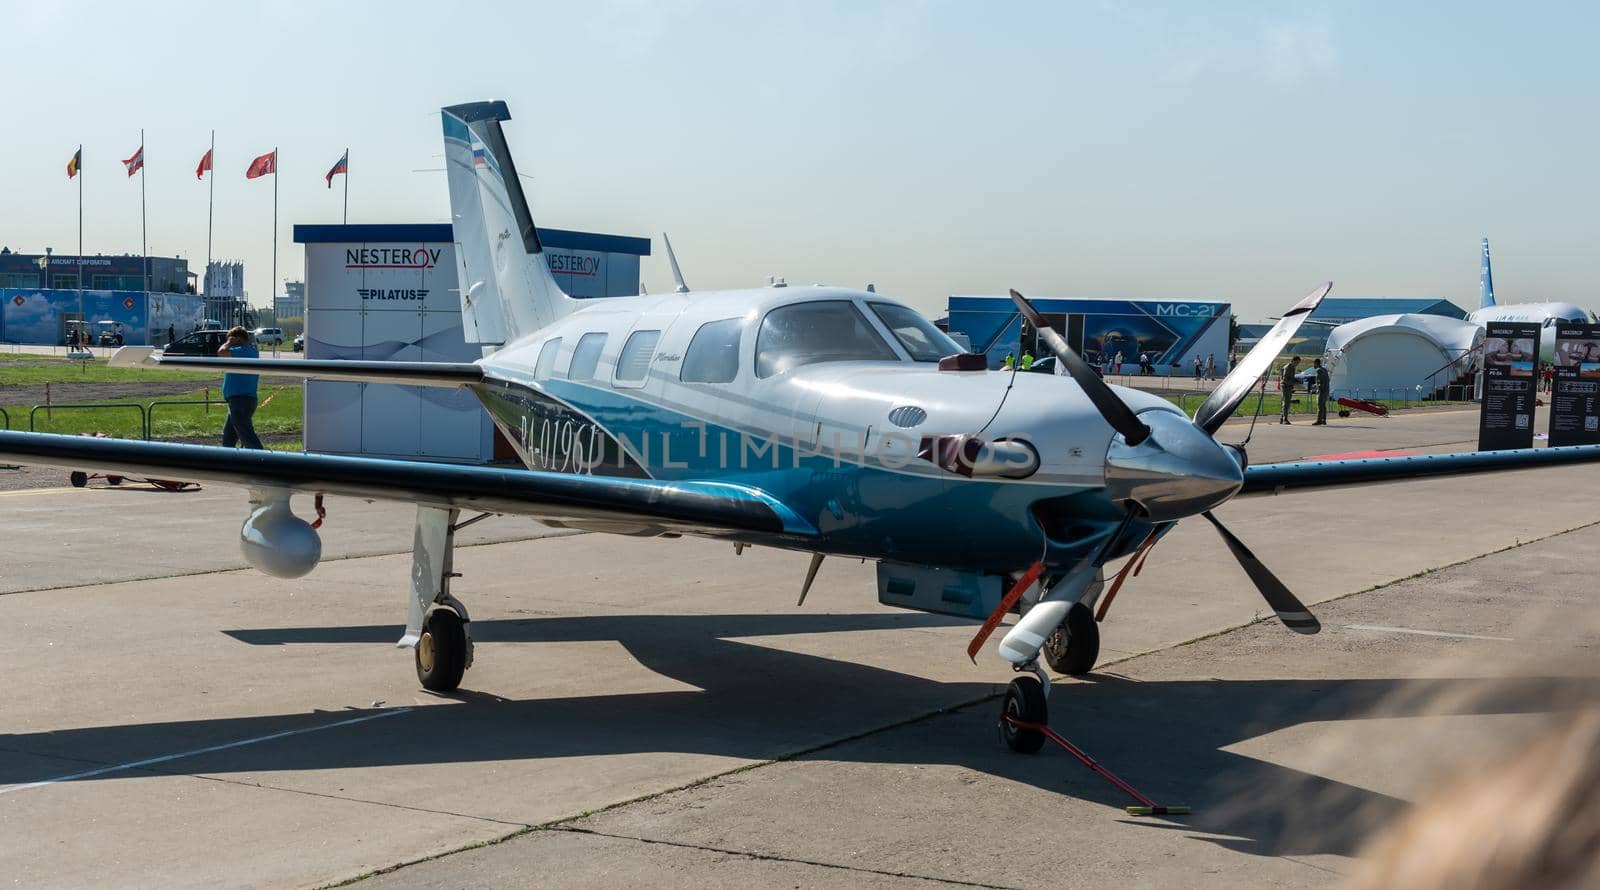 August 30, 2019, Moscow region, Russia.  Piper PA-46 Meridian light single-engine aircraft at the International aviation and space salon.